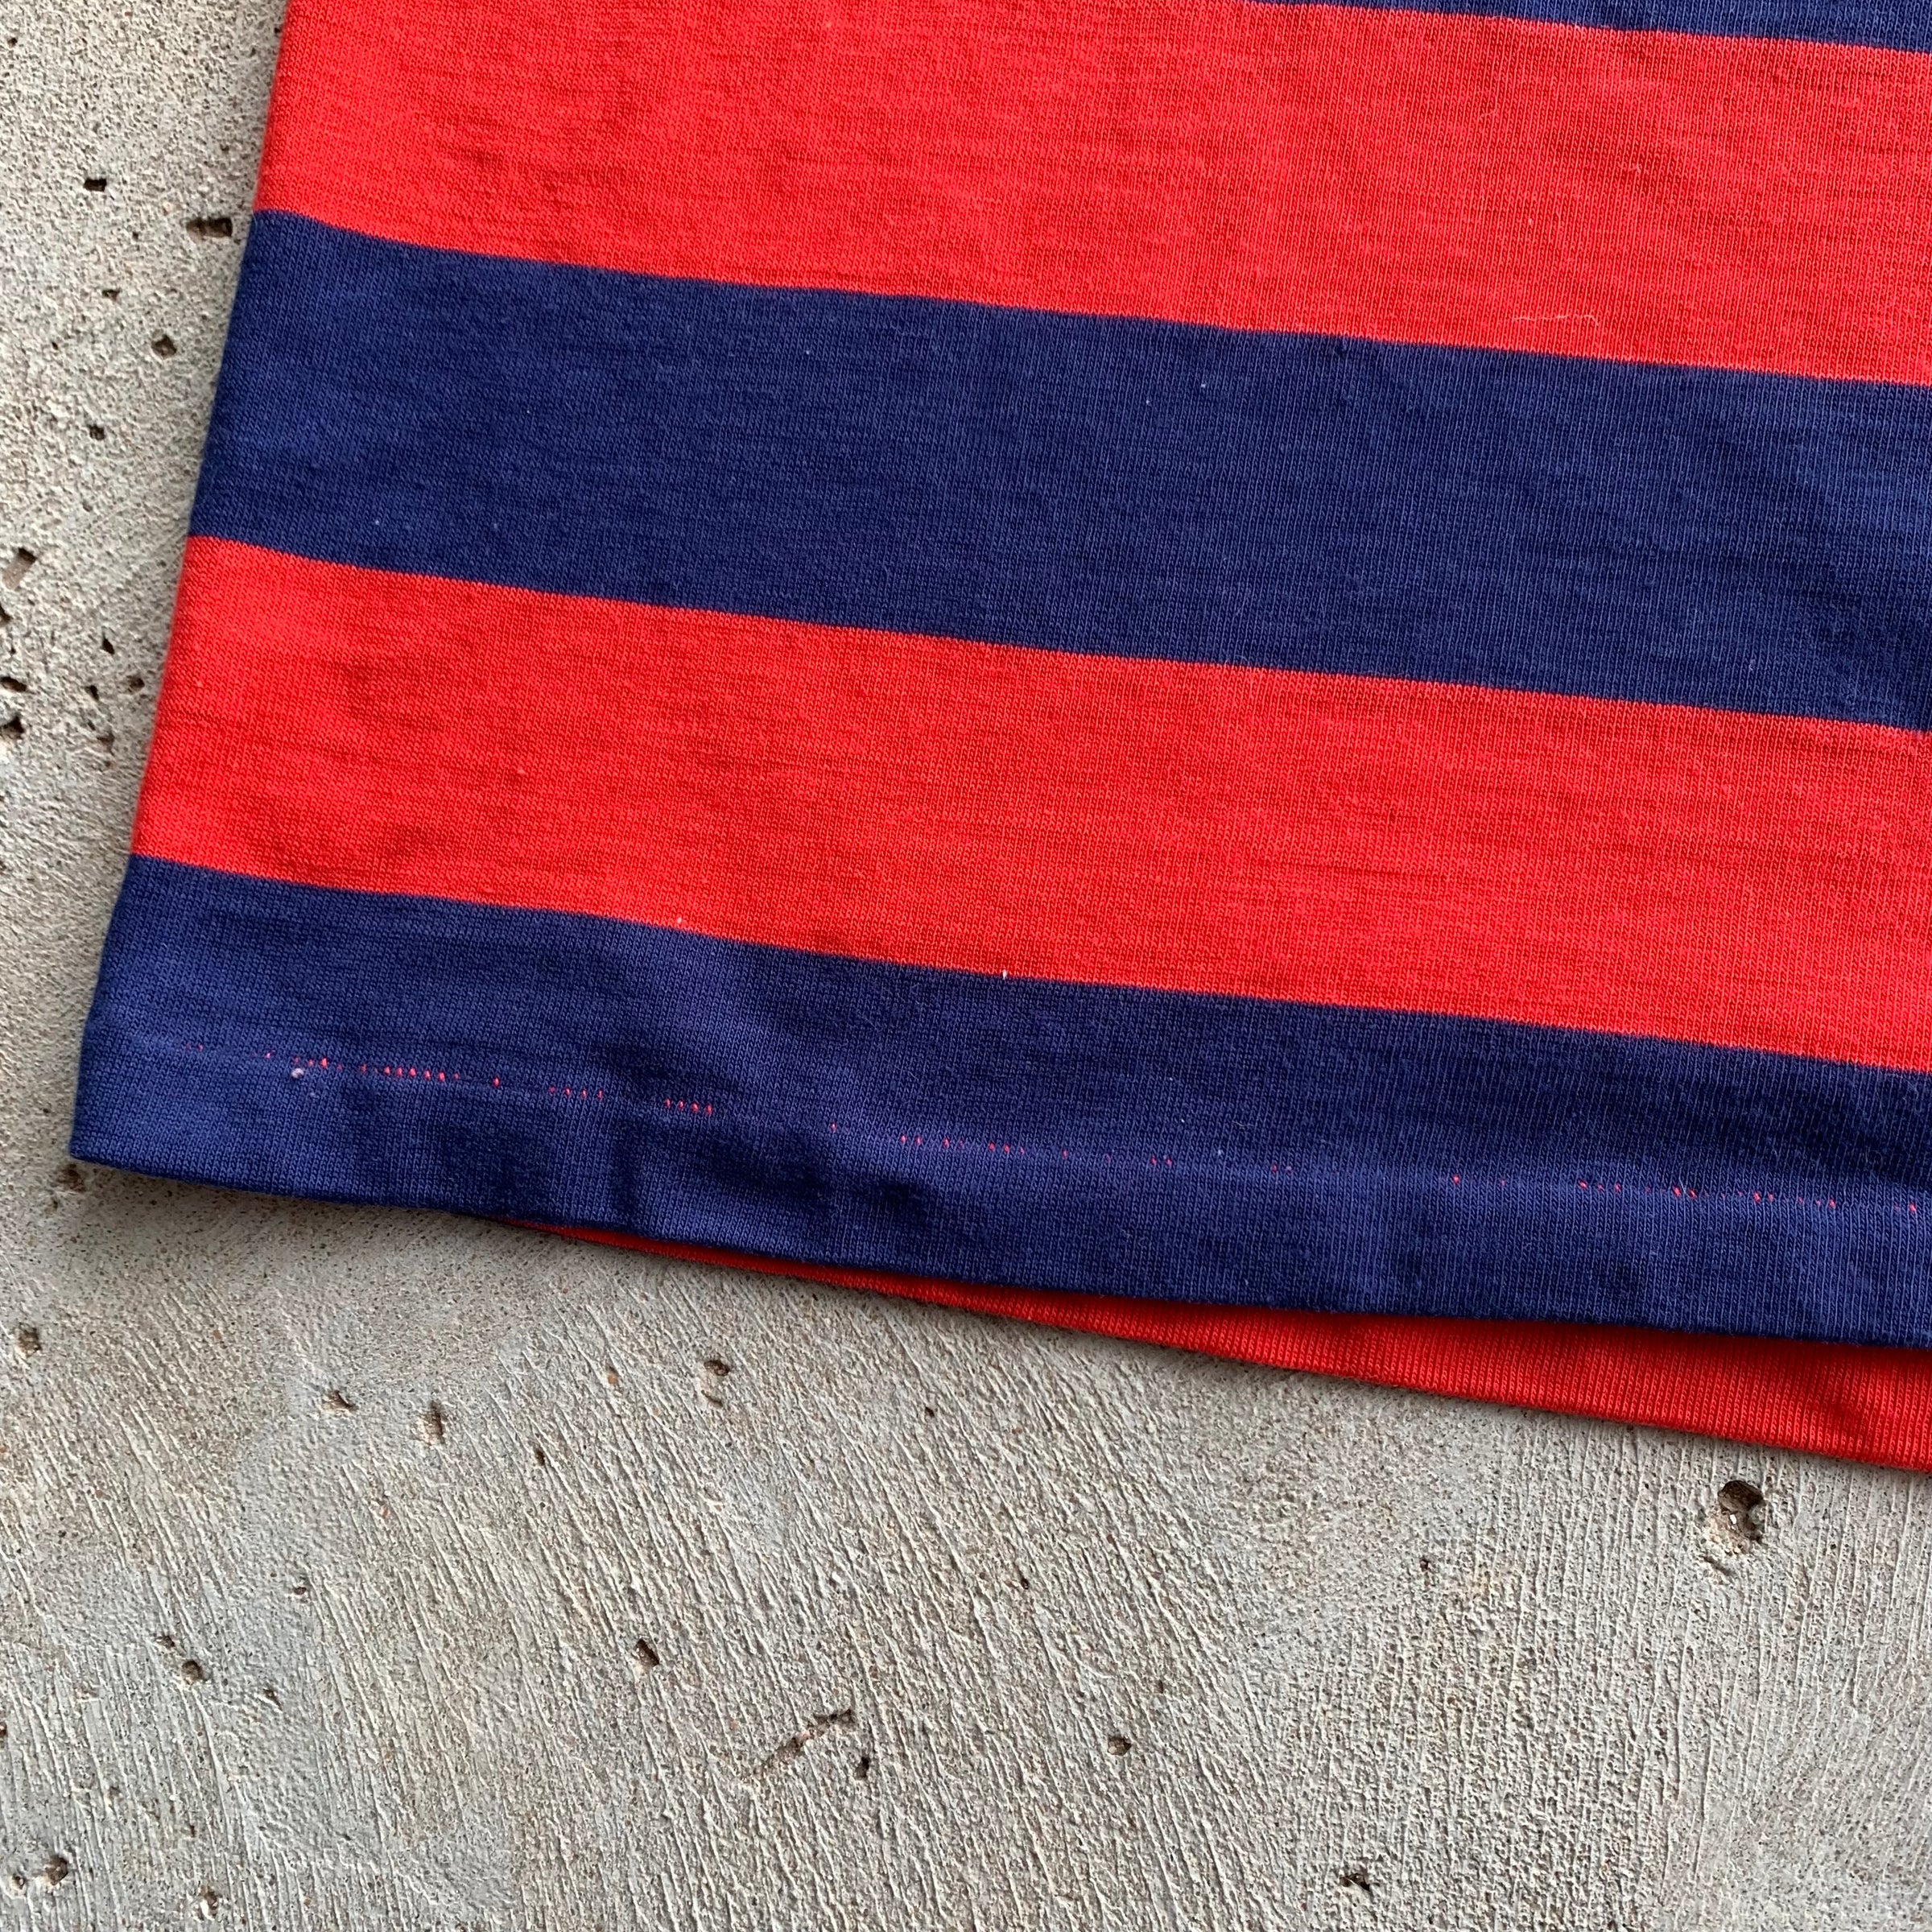 1960's/70's Jantzen Red and Blue Border Stripe T-Shirt Small